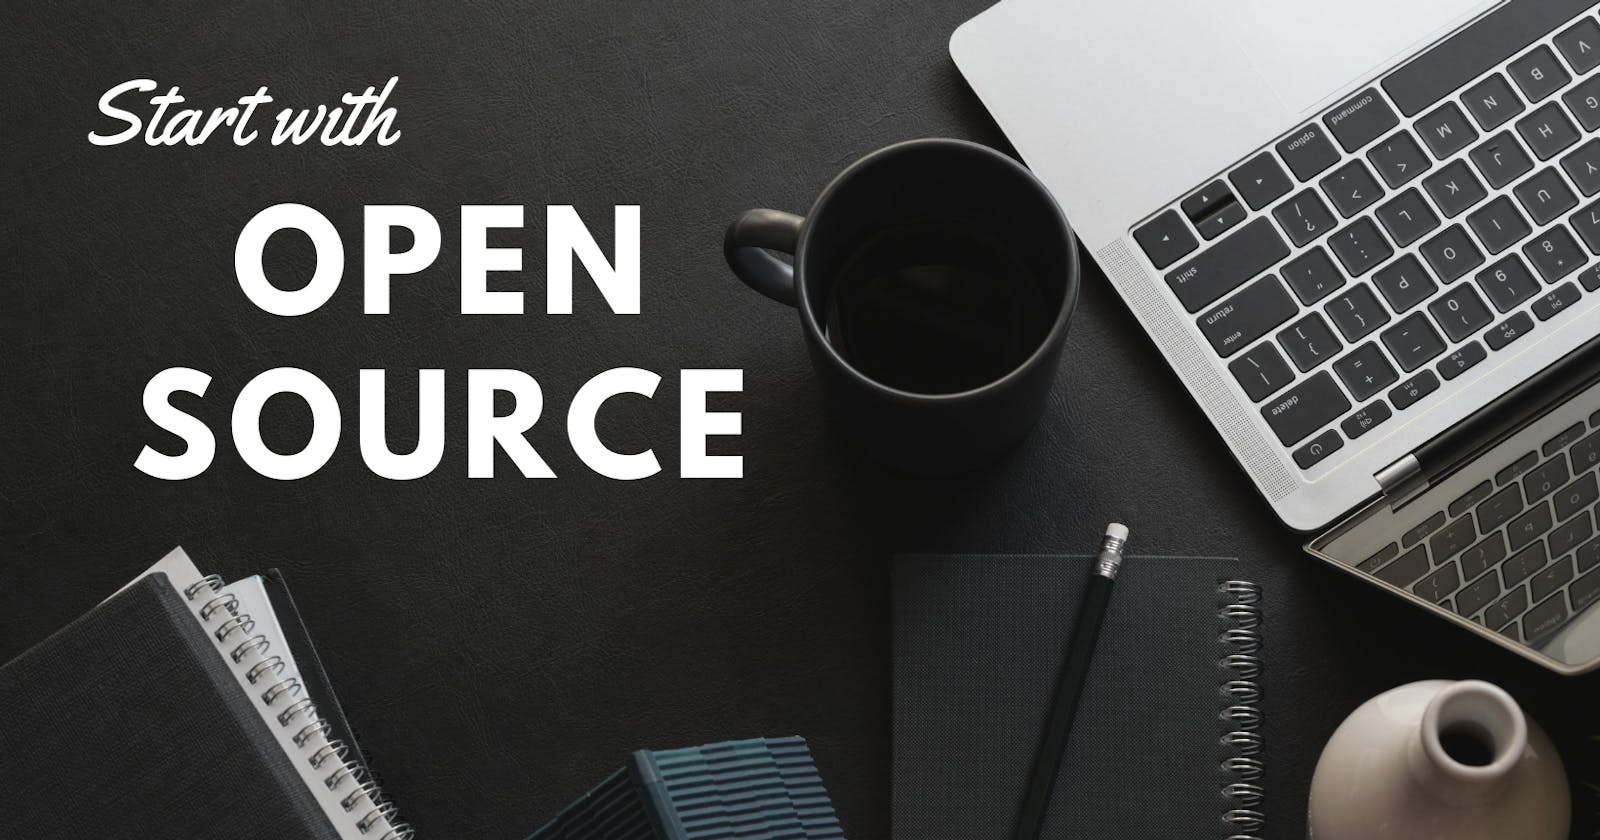 How you can also start with Open-Source?